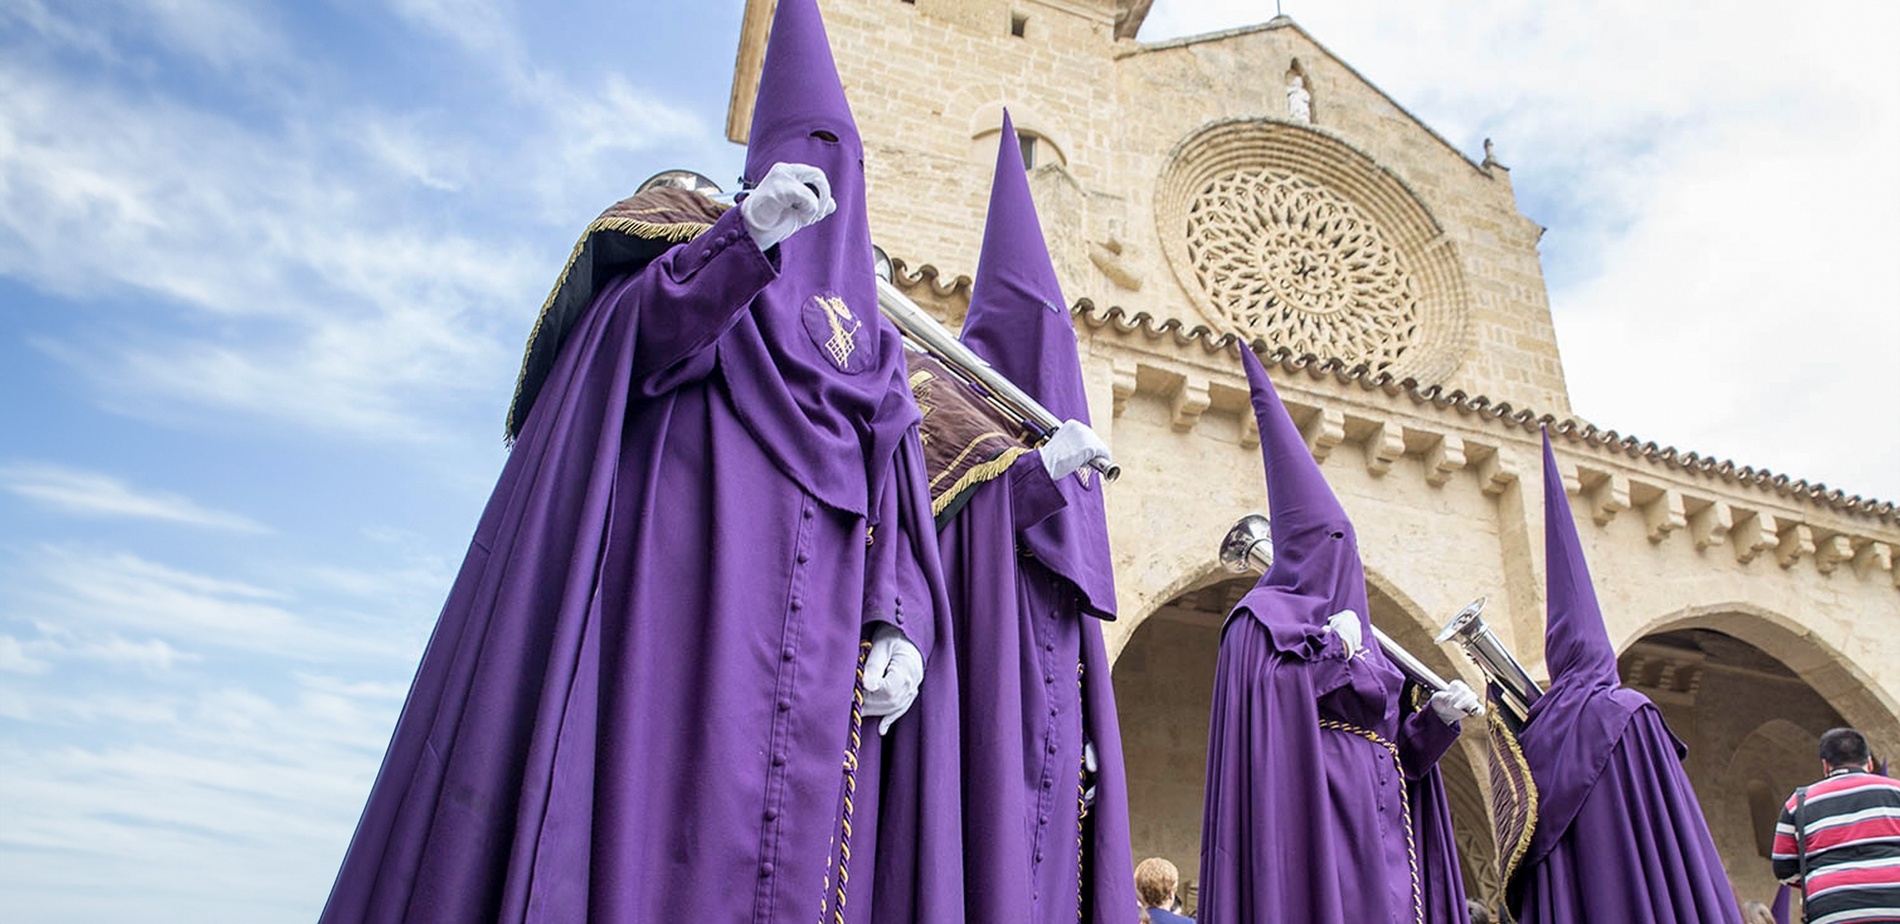 a group of people in purple robes are standing in front of a building